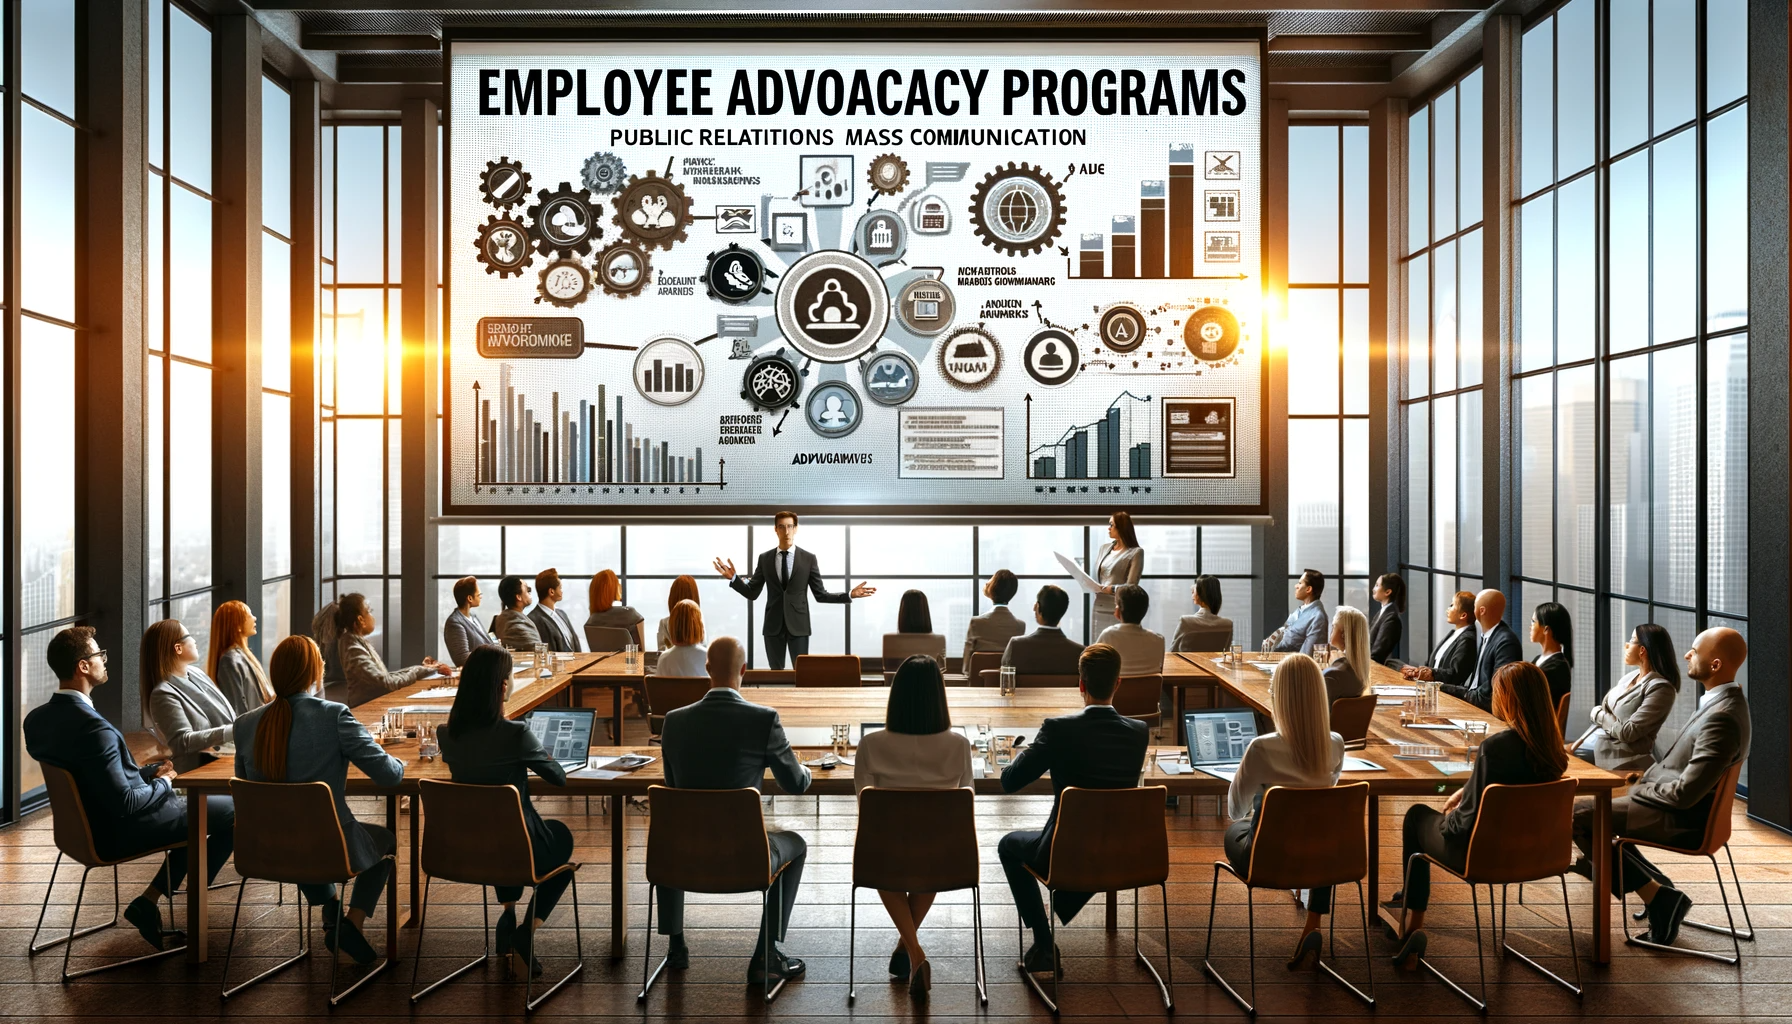 employee advocacy programs for public relations mass communication